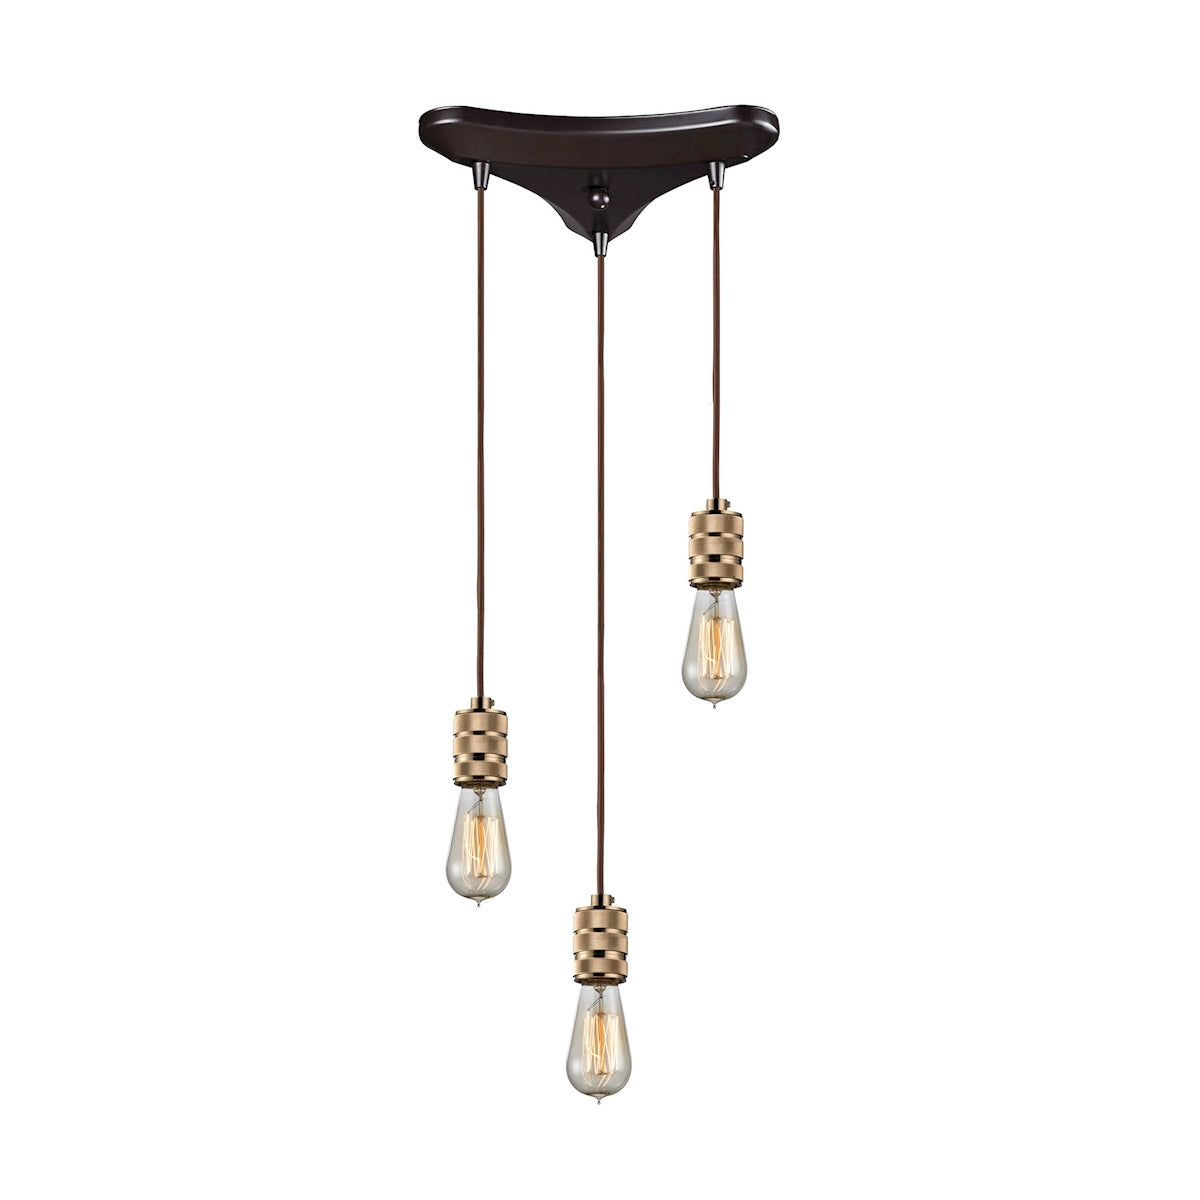 ELK Lighting 14391/3 Camley 3-Light Triangular Pendant Fixture in Oil Rubbed Bronze and Polished Gold